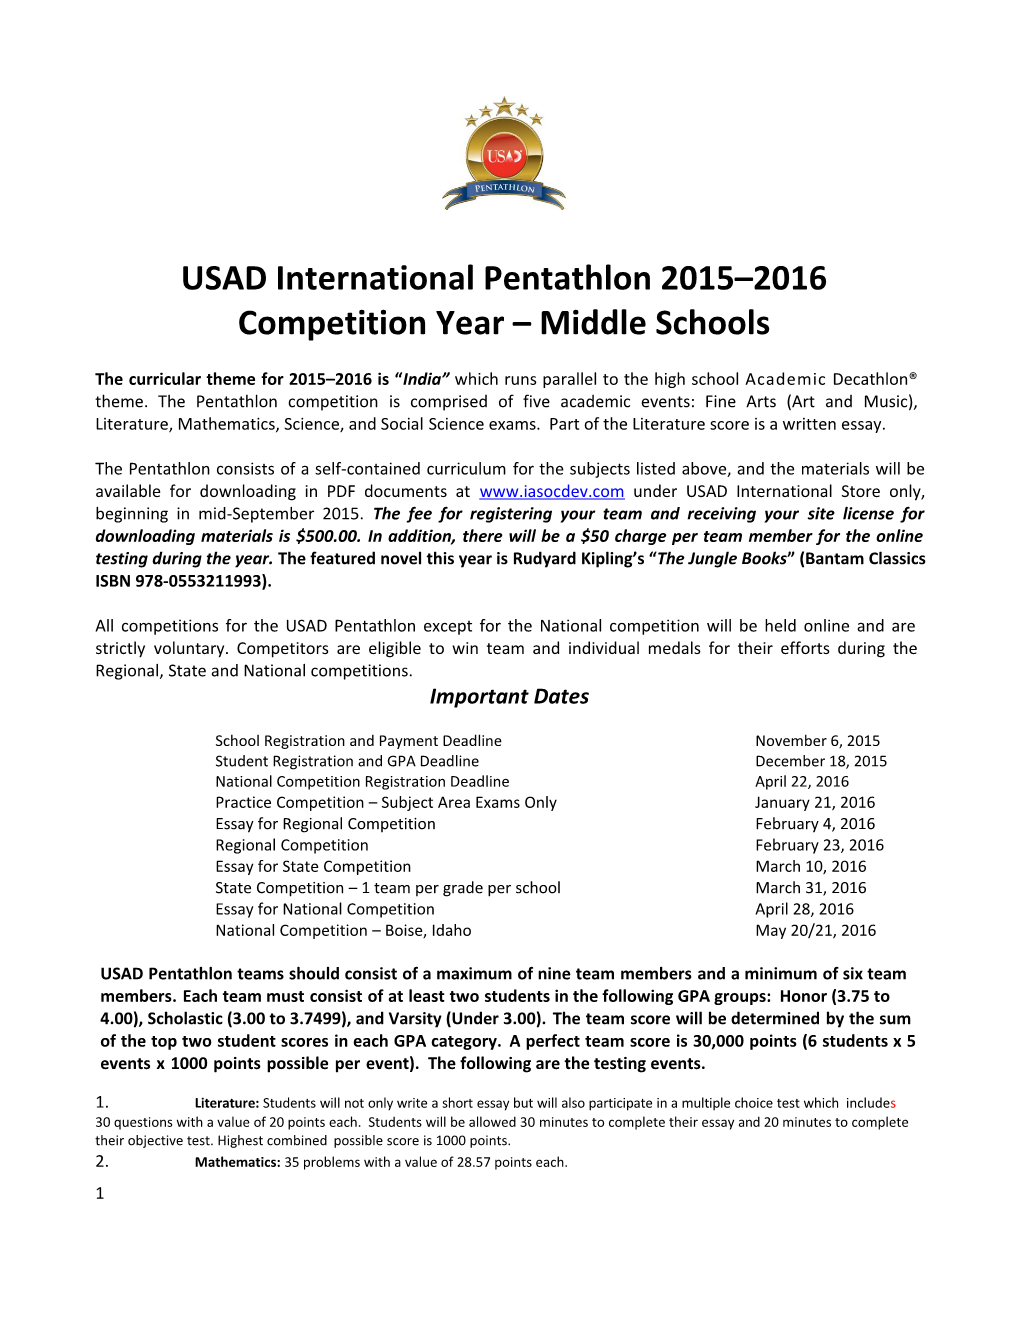 USAD Is Looking at Creating an Official International Academic Decathlon